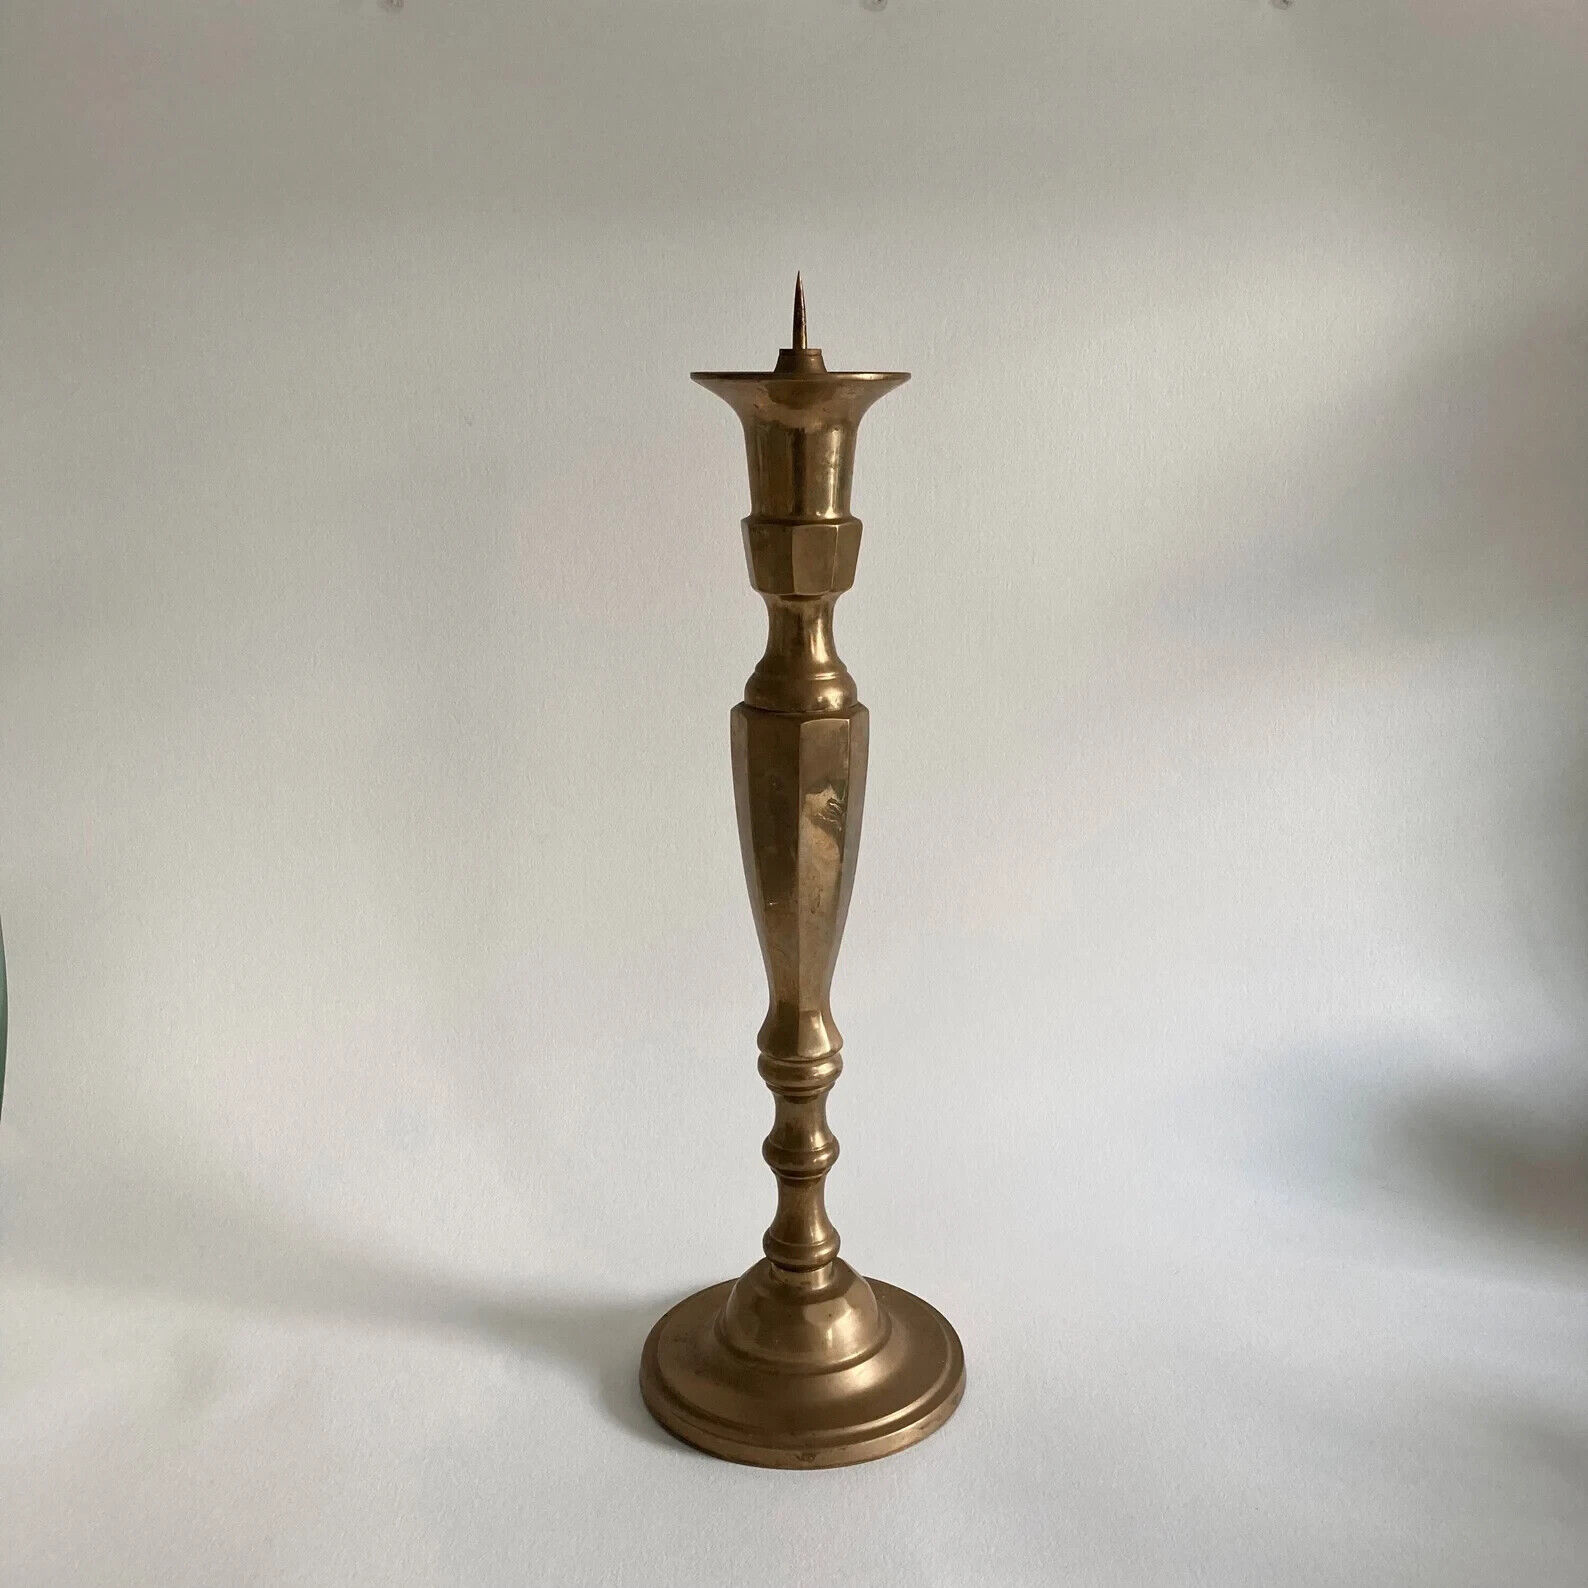 Tall Solid Brass Pricket Candlestick – Made in Hong Kong – 19